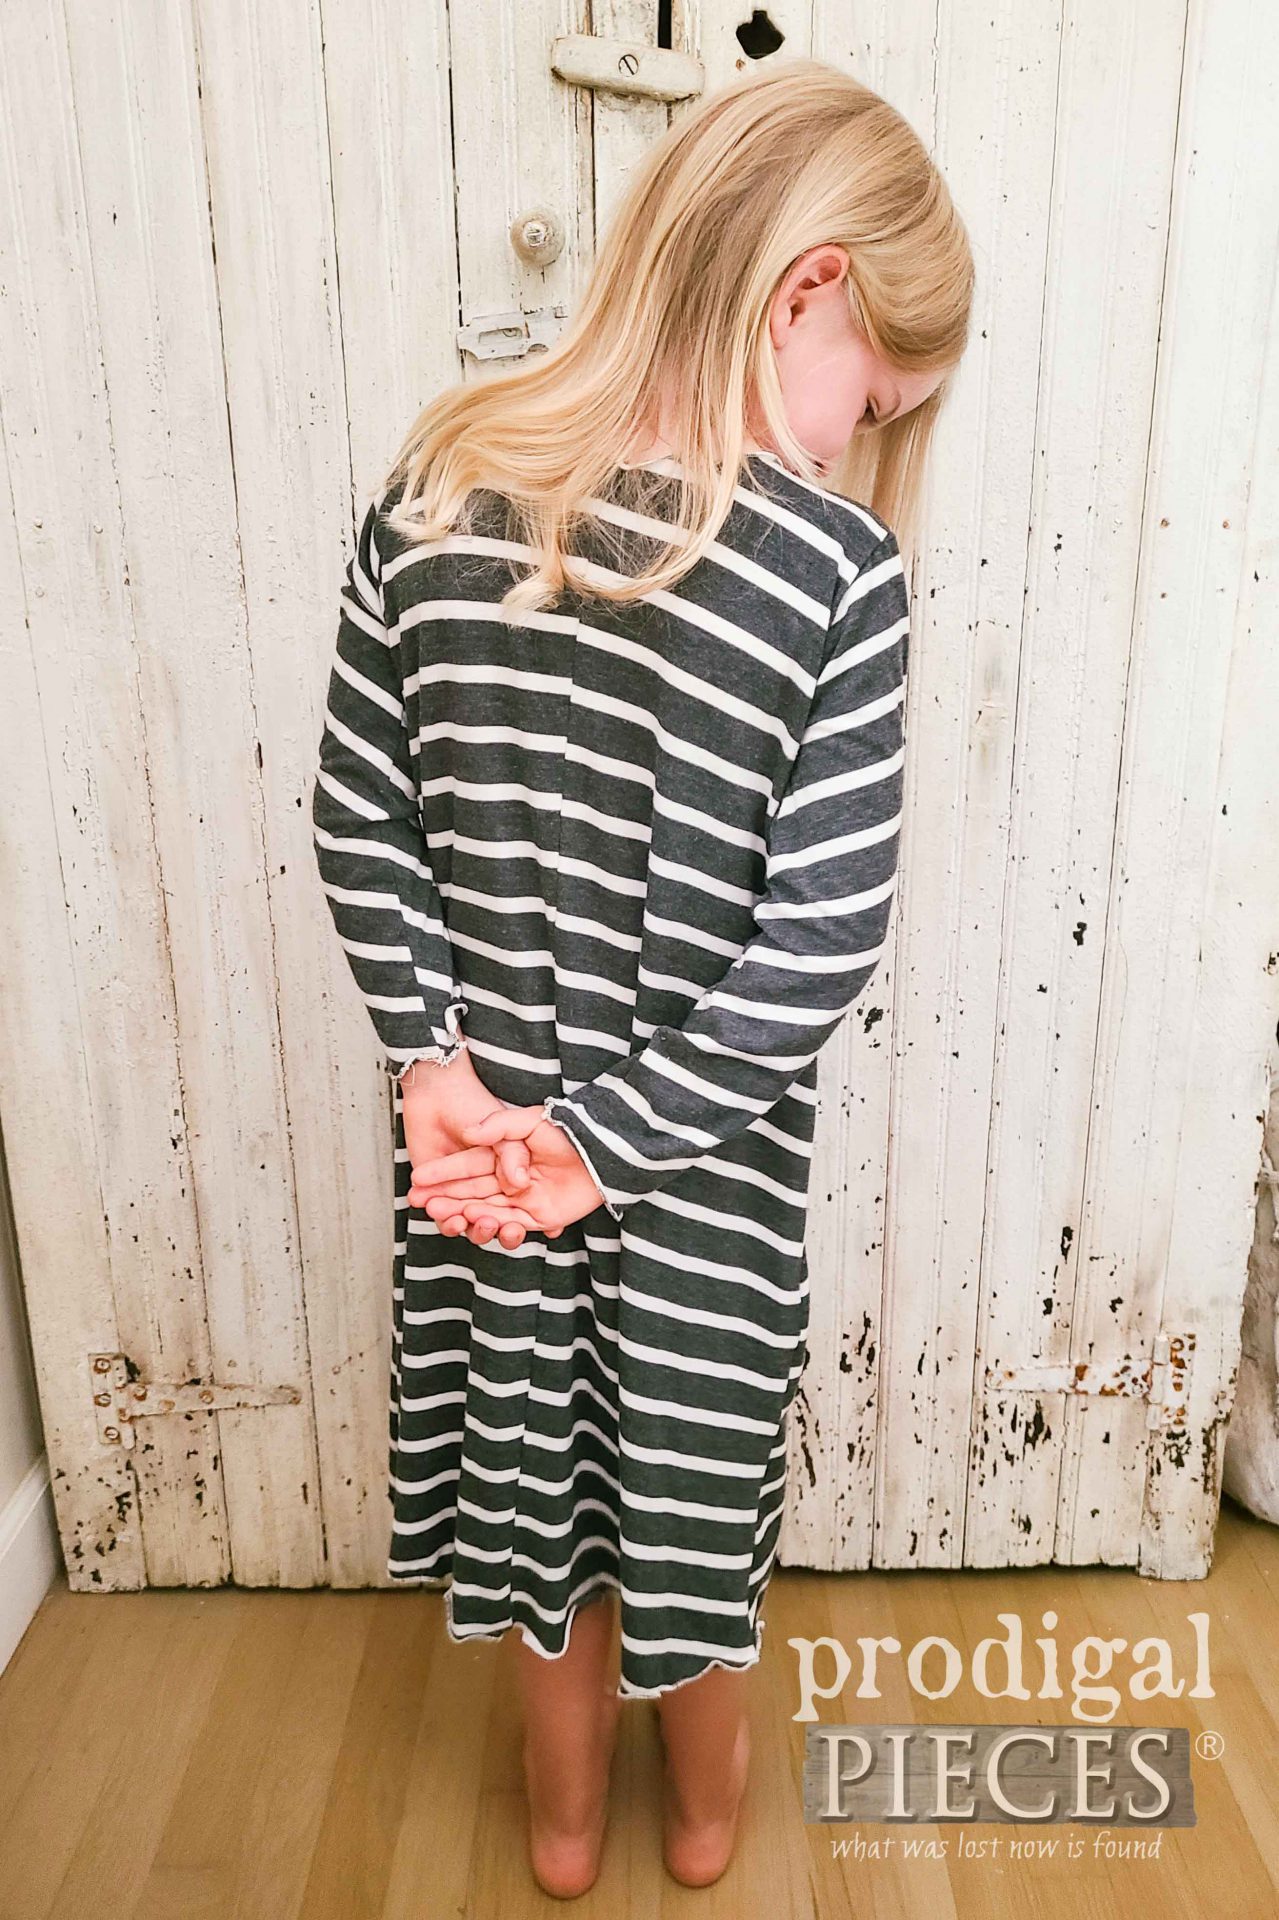 Gray & White Striped Nightgown by Larissa of Prodigal Pieces | prodigalpieces.com #prodigalpieces #sewing #fashion #refashion #upcycled